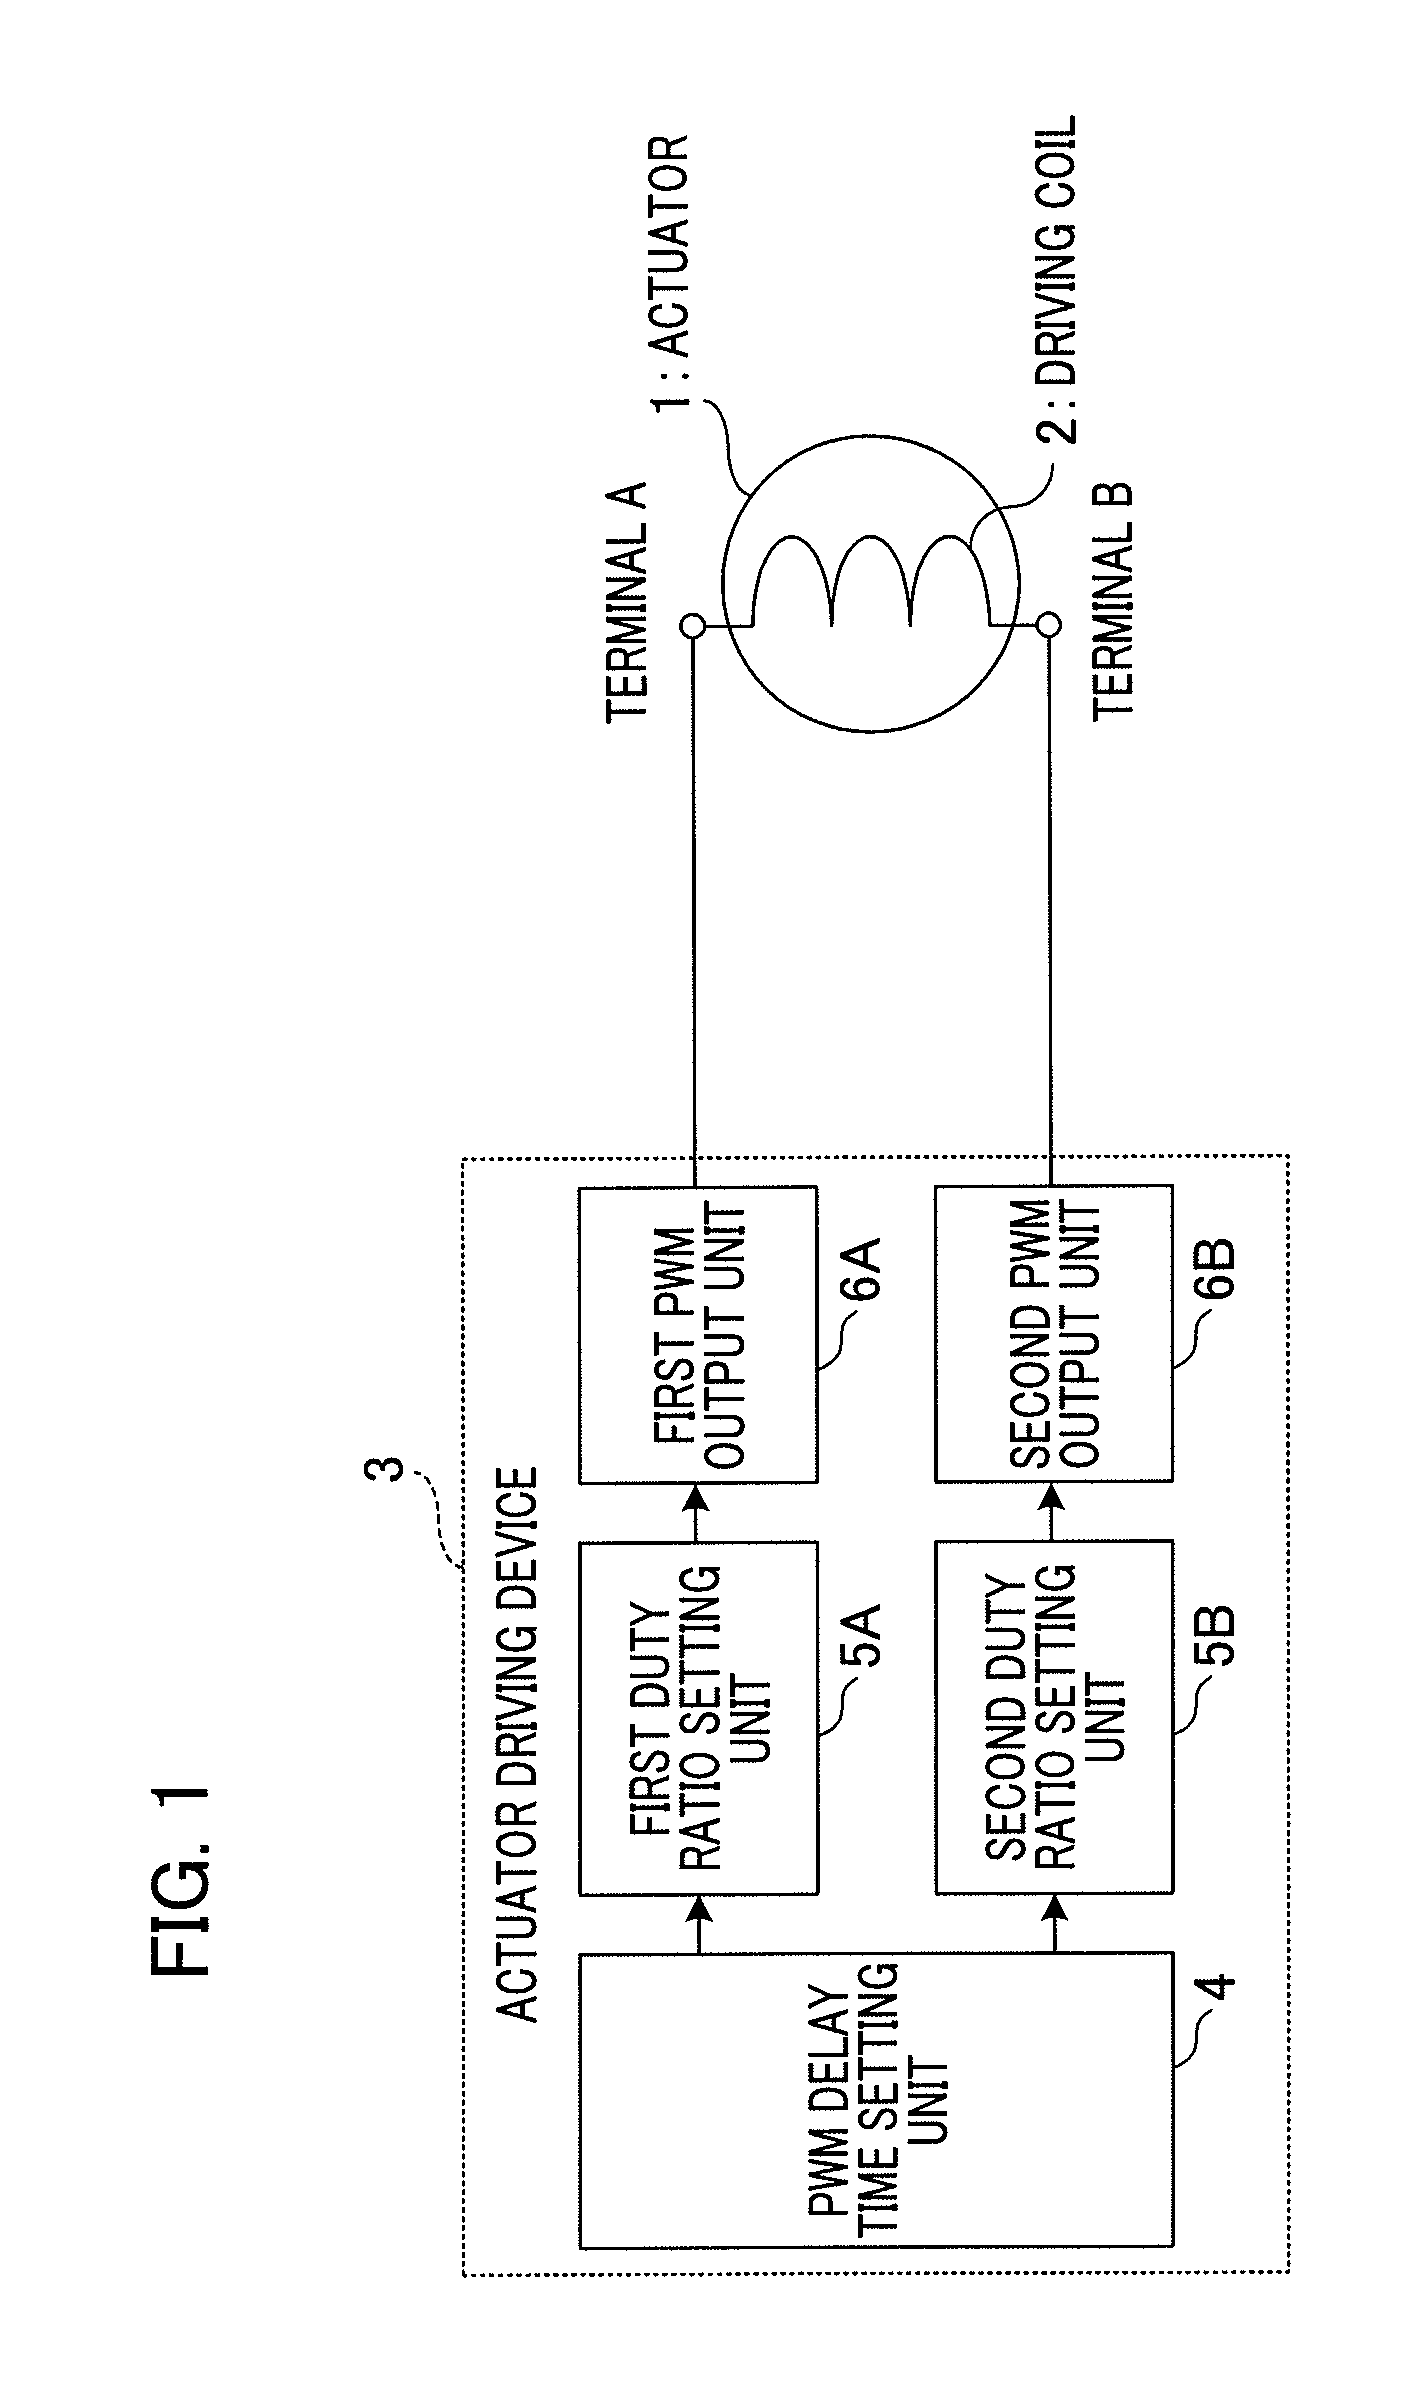 Actuator driving device for executing positive and negative energization method under pulse width modulation control